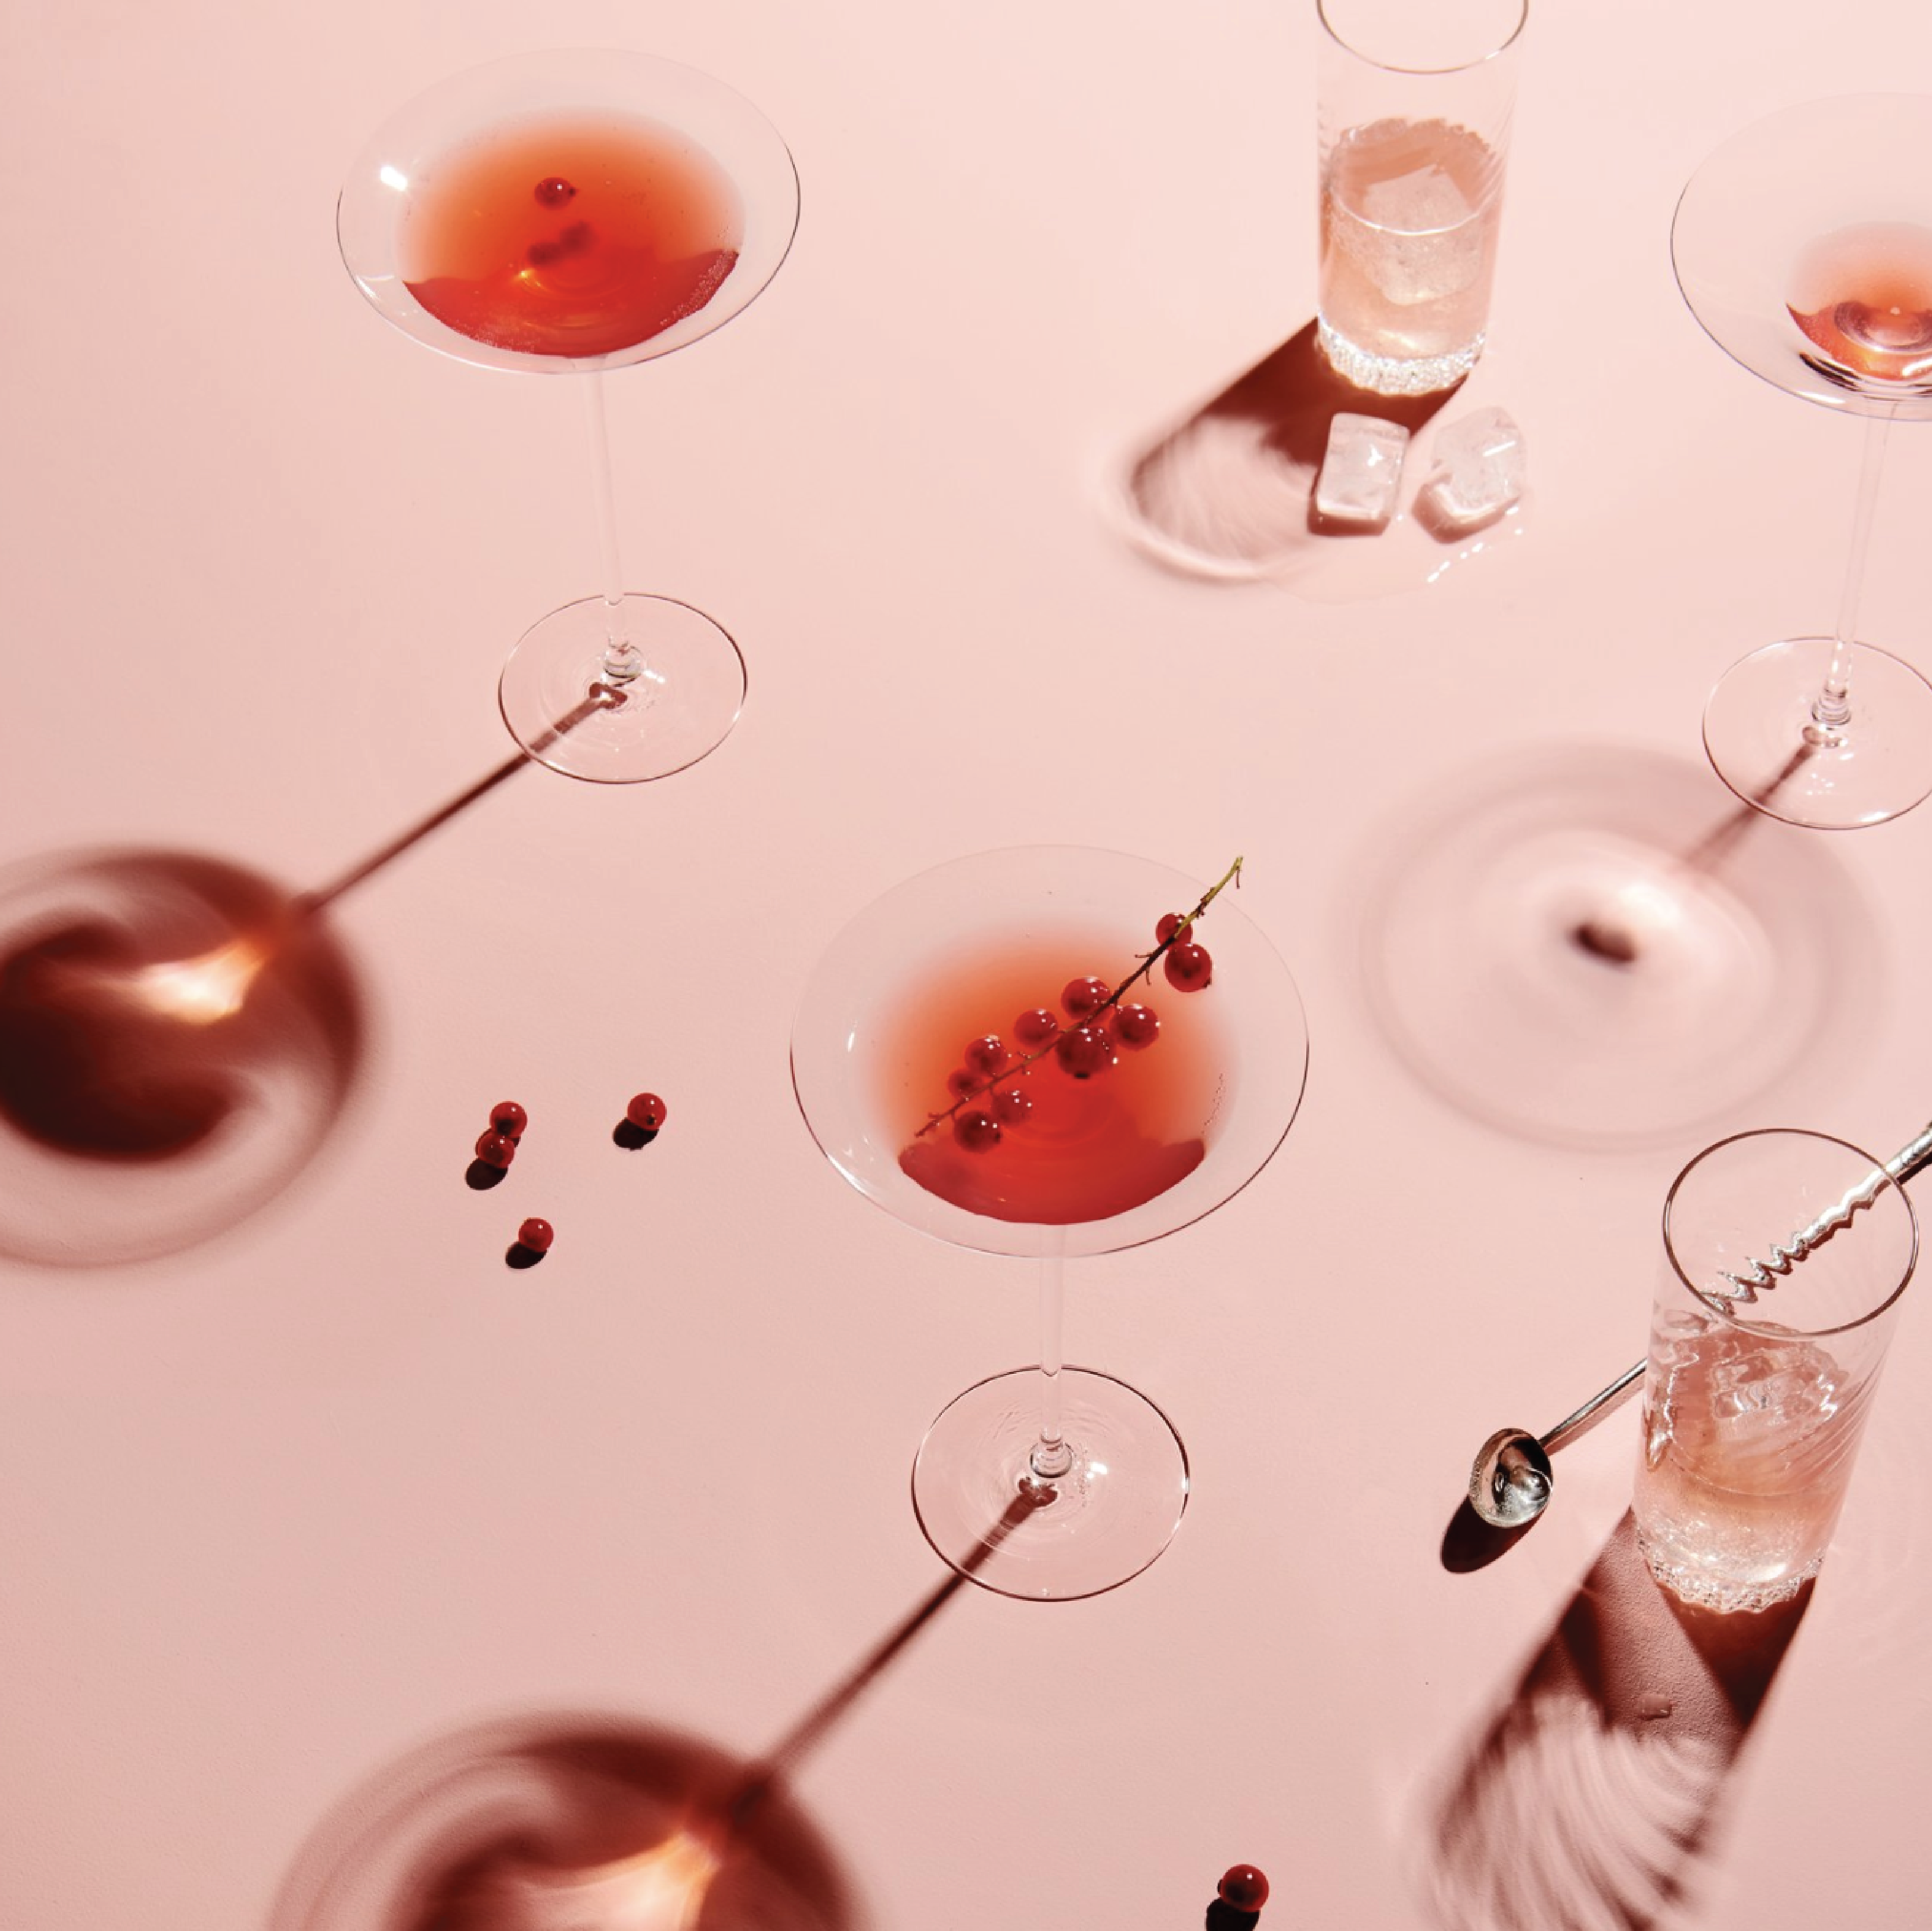 Cocktails arranged on a pink surface, example of student photography